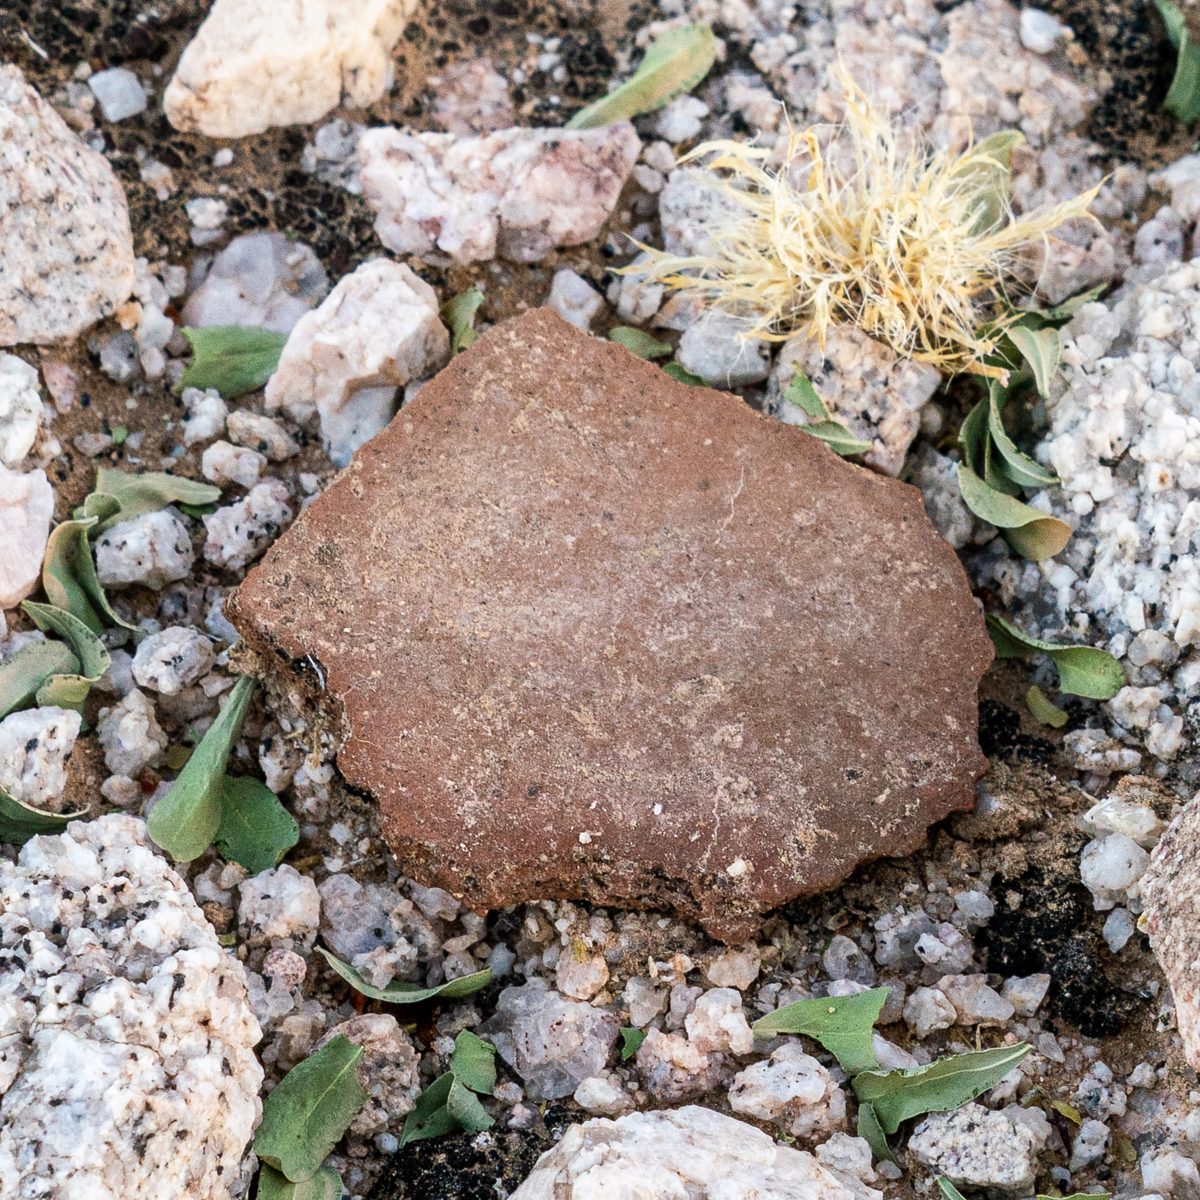 2019 October Sherd in the High Tanks Area